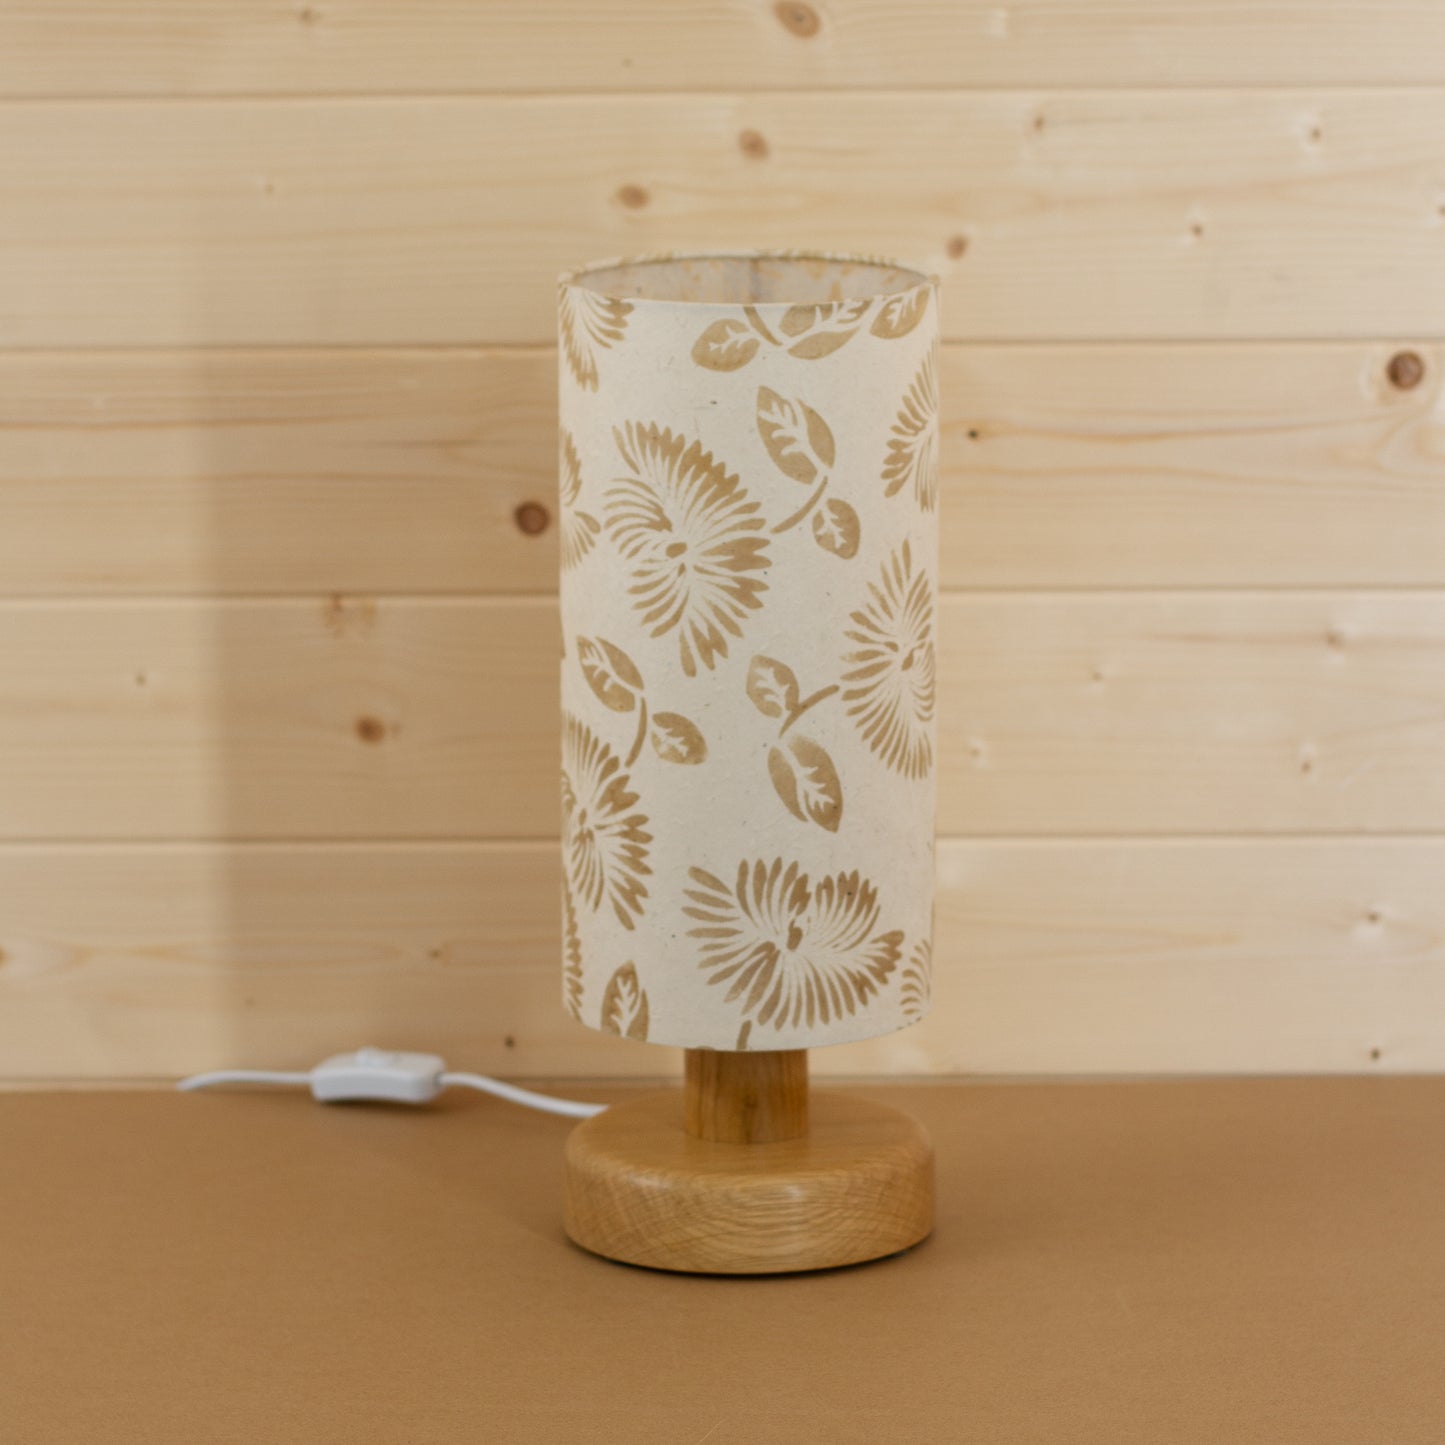 Round Oak Table Lamp (15cm) with 15cm x 30cm Lamp Shade in P09 ~ Batik Peony on Natural